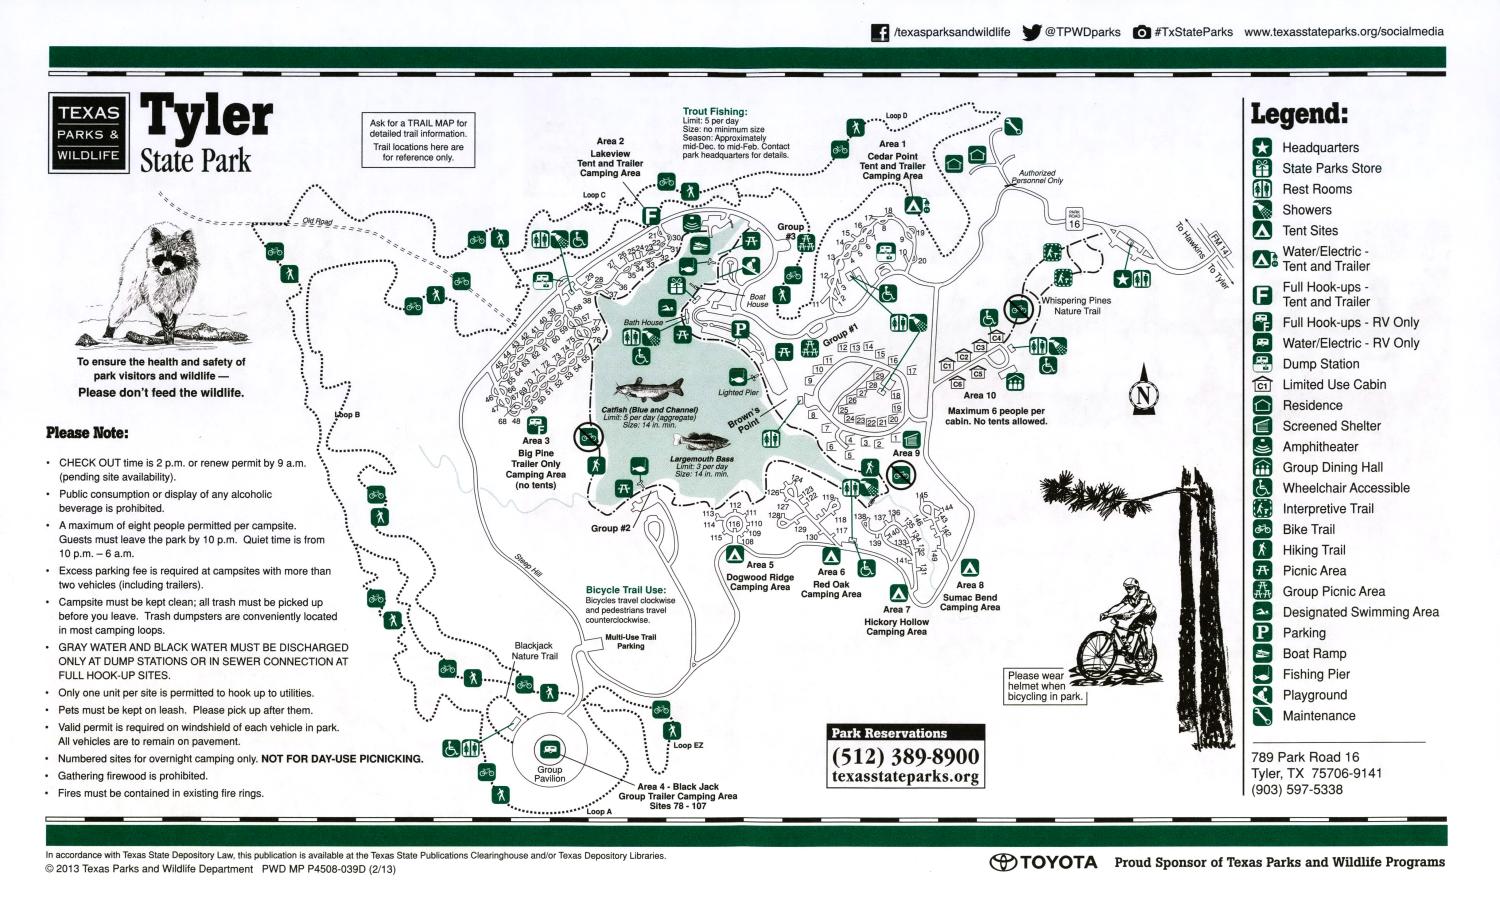 pdf map of texas state parks Tyler State Park The Portal To Texas History pdf map of texas state parks